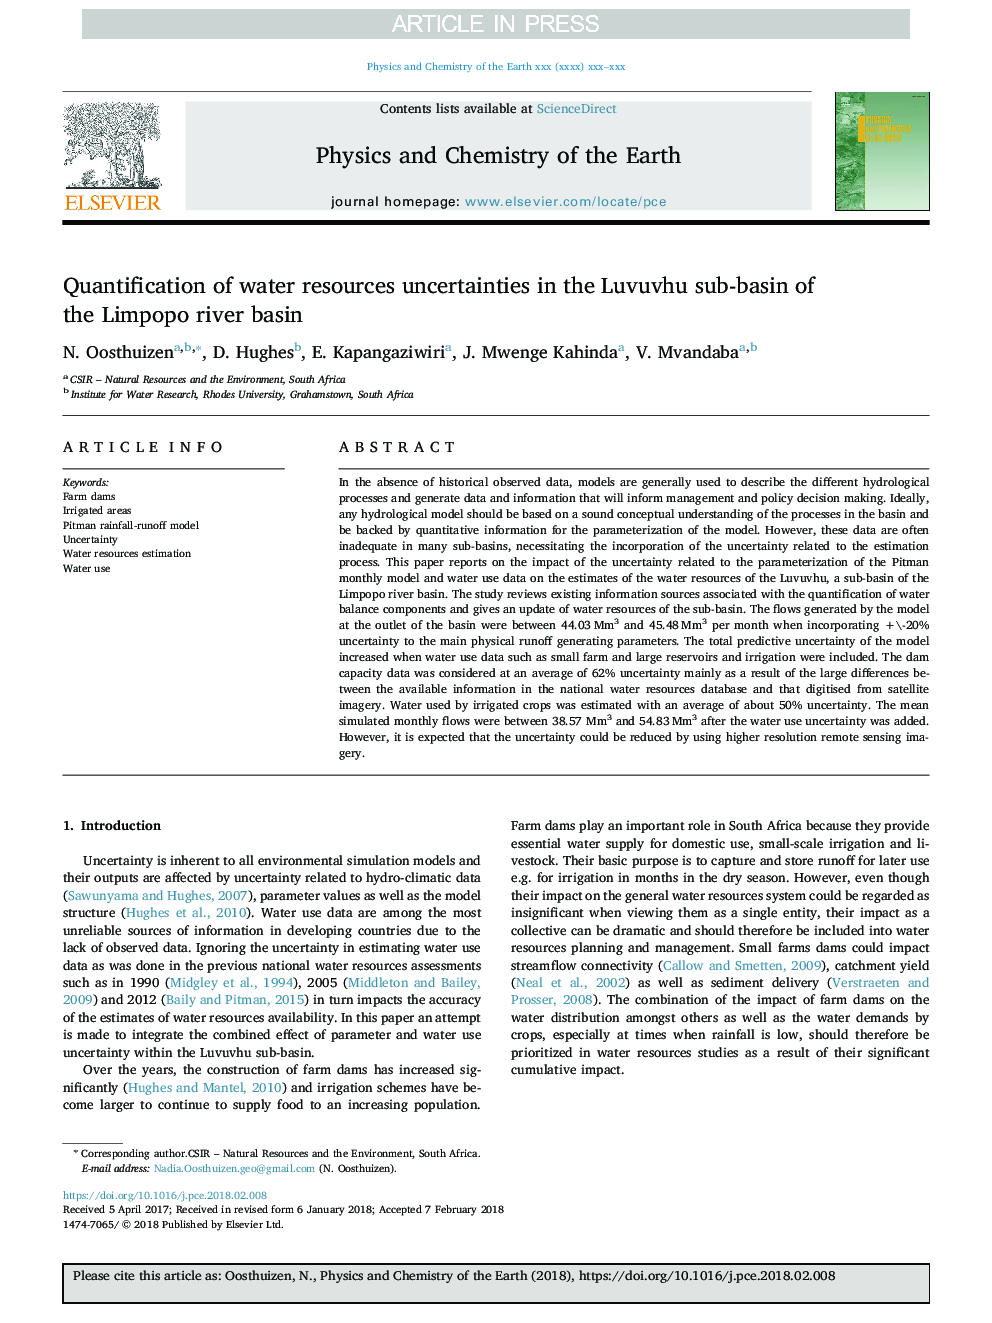 Quantification of water resources uncertainties in the Luvuvhu sub-basin of the Limpopo river basin